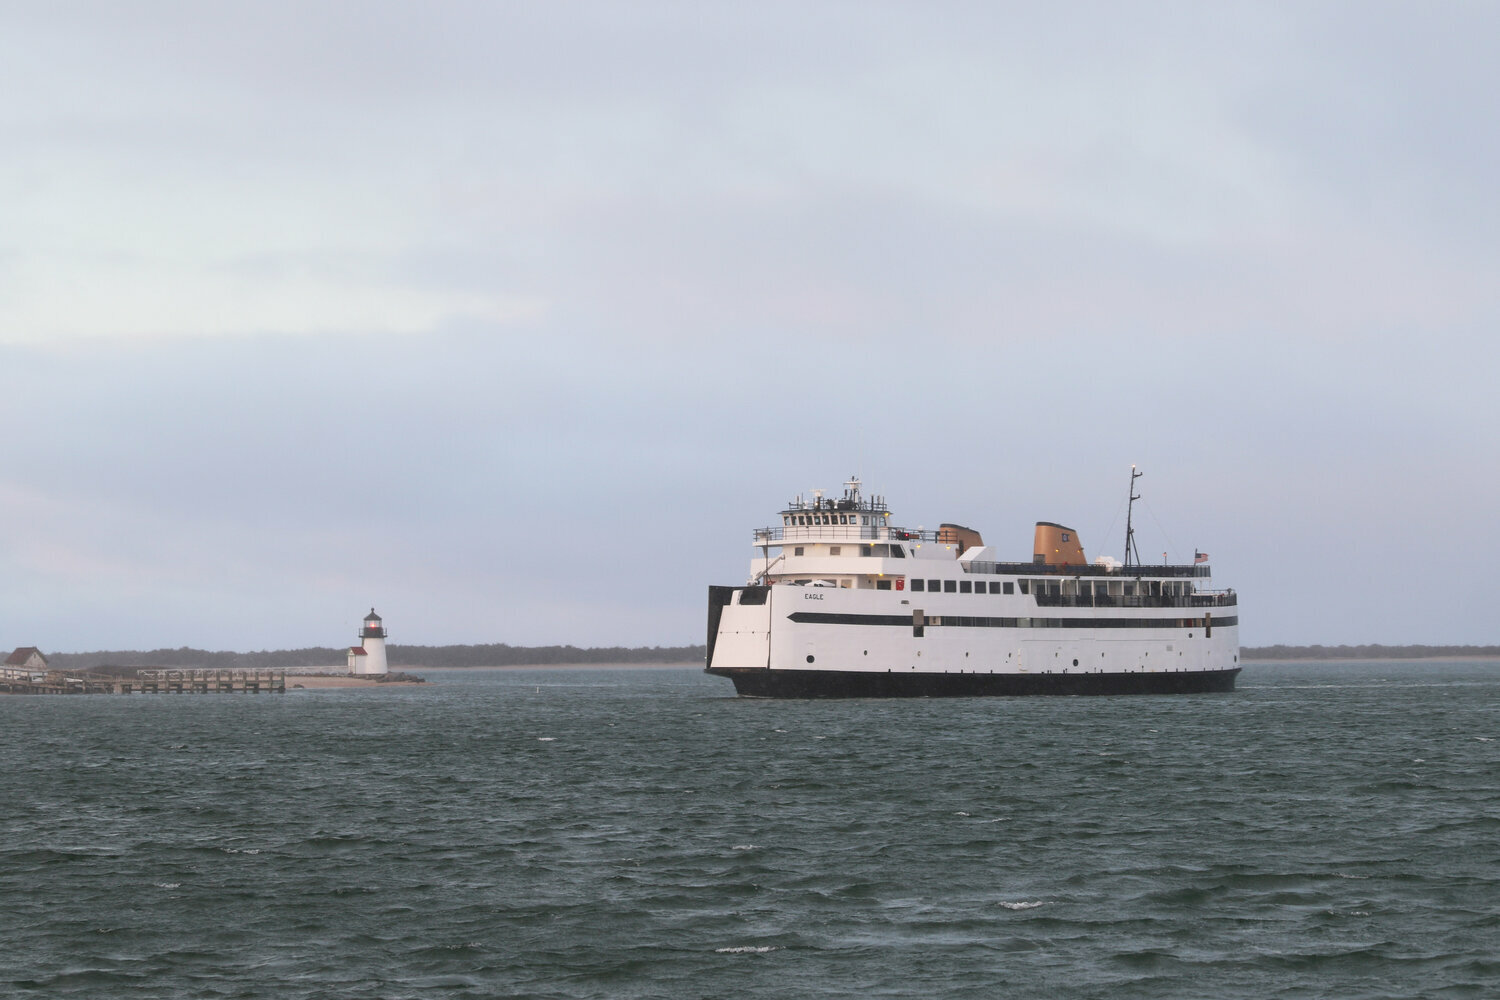 The Steamship Authority’s M/V Eagle makes its way past Brant Point through an empty Nantucket harbor.